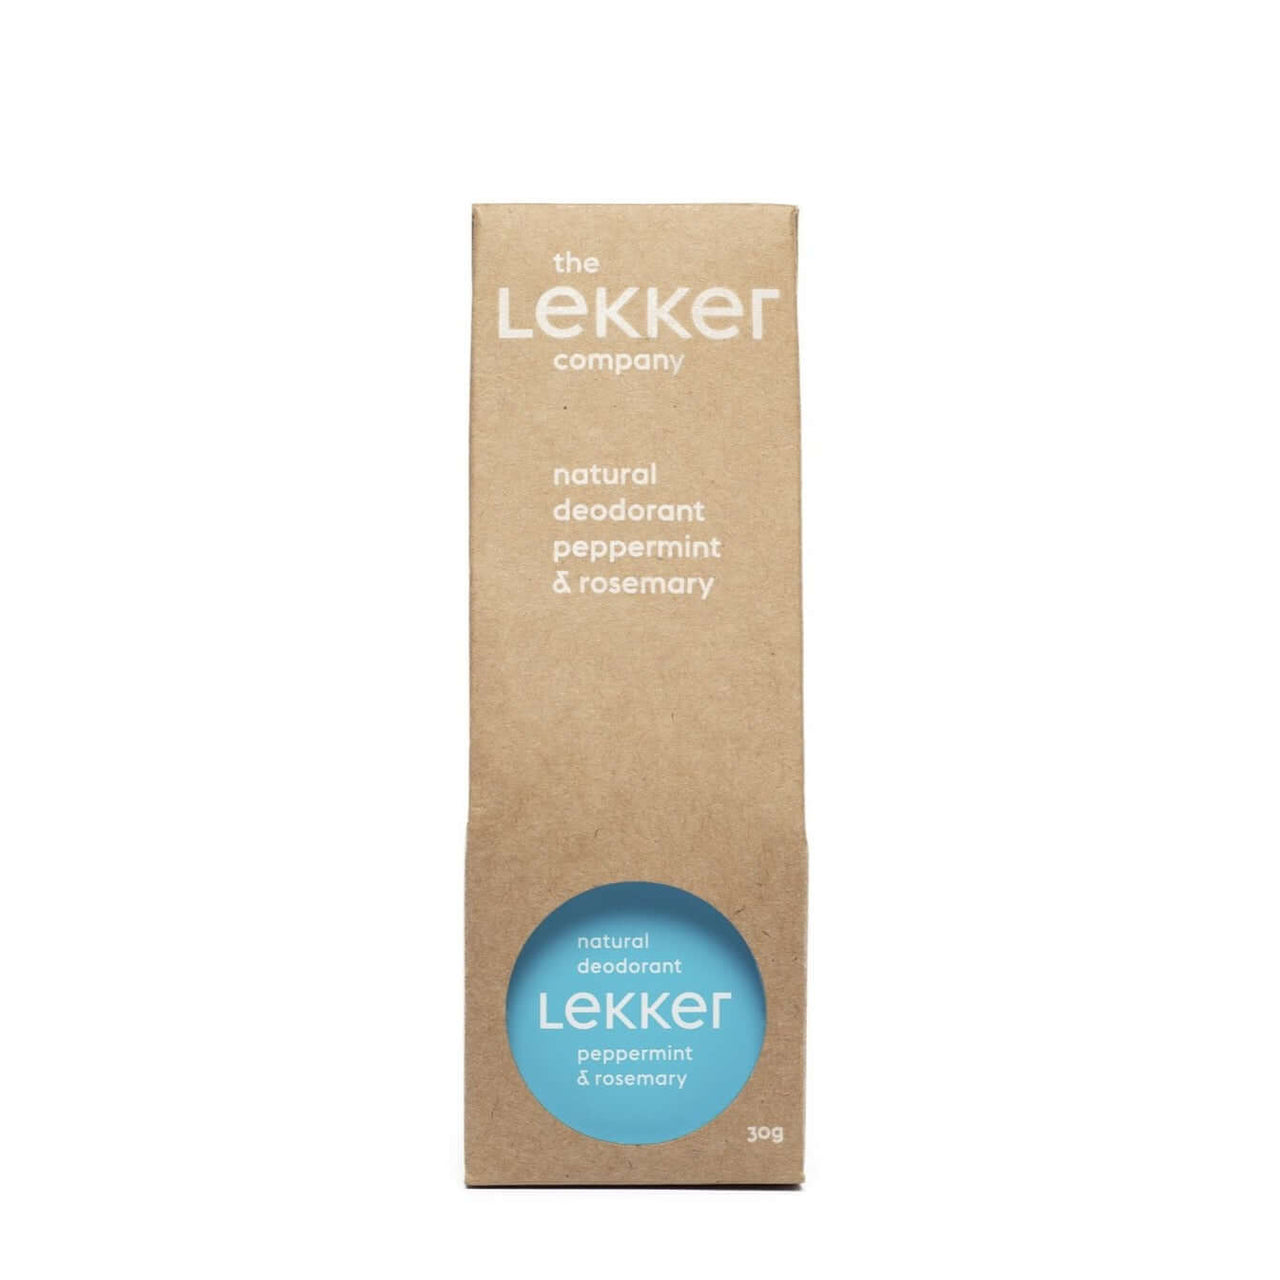 The Lekker Company Natural Deodorant PEPPERMINT and ROSEMARY